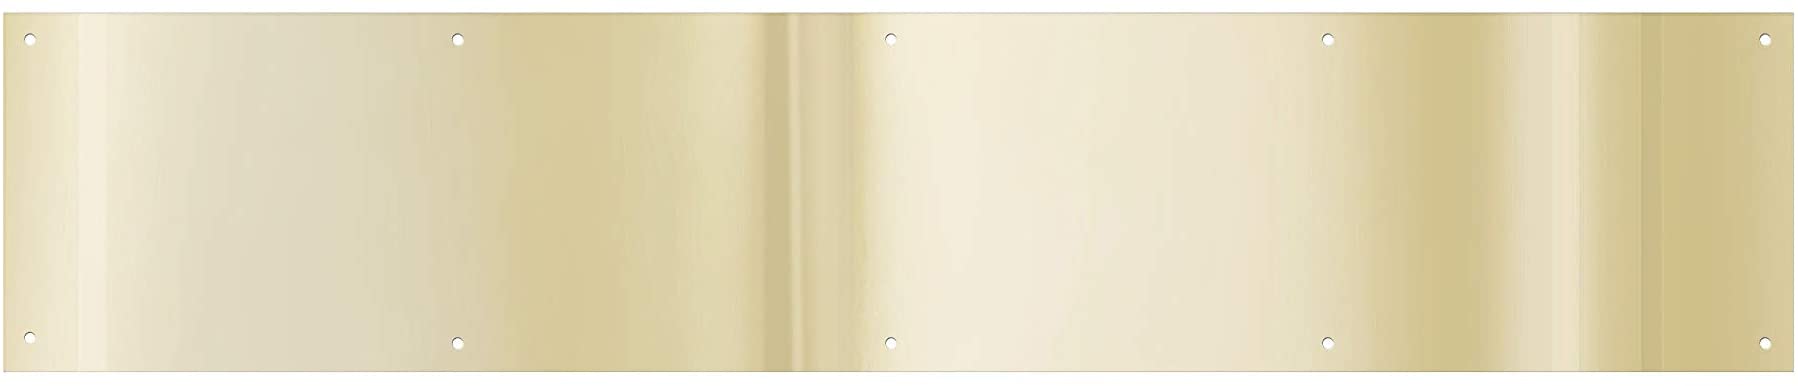 National Hardware Brass Kickplate for Front Doors, 6"x30" Brass Door Plate for Exterior Doors Like Front, Back, or Garage Doors where a Kick Plate Will Add Protection from Mud and Scratches, N270-306